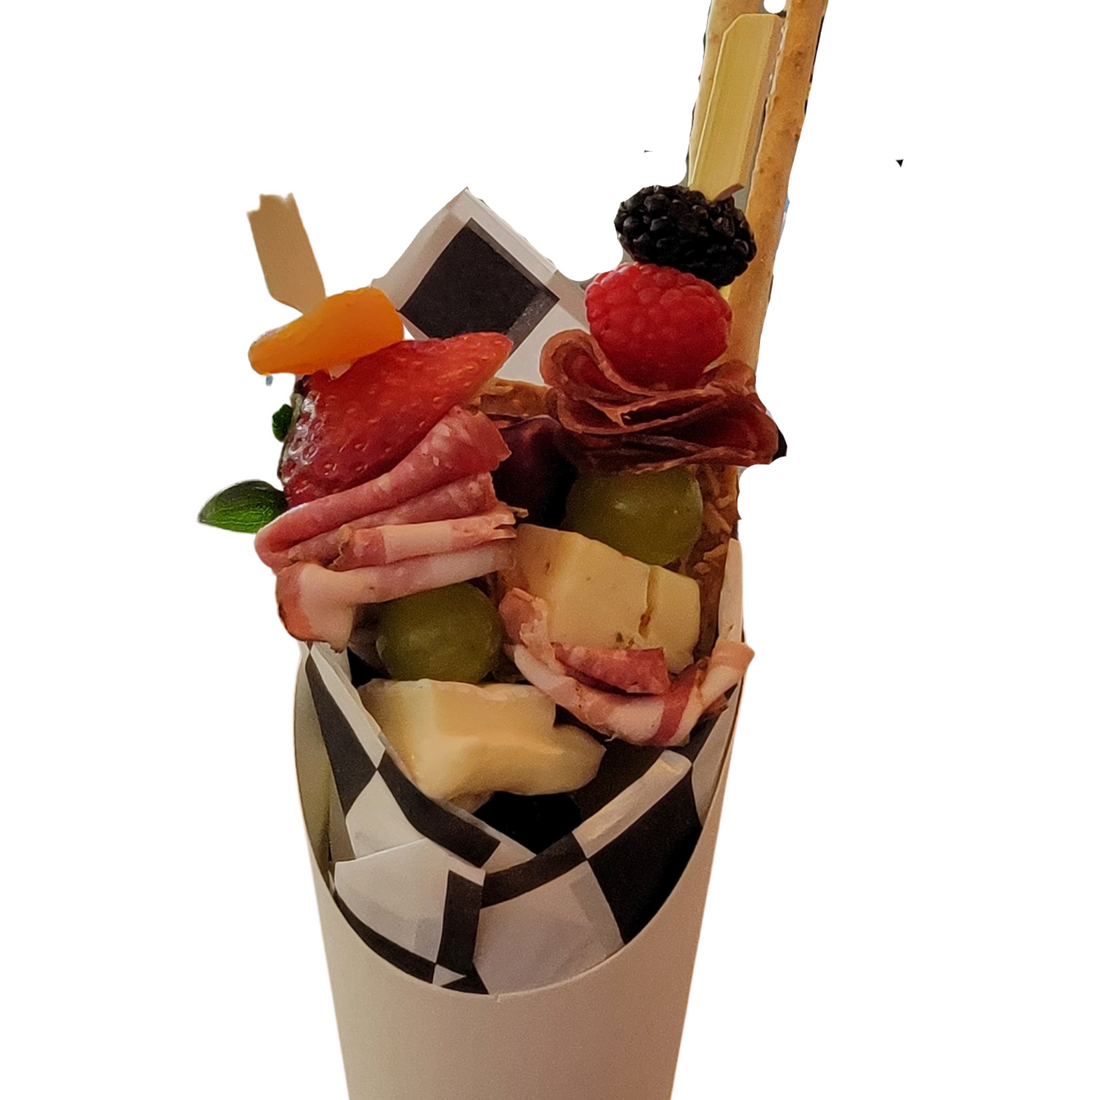 Charcuterie Cups - 6 Individual Charcuterie Cup - Pick up or same day delivery (Ottawa Area Only - extra charge for delivery)